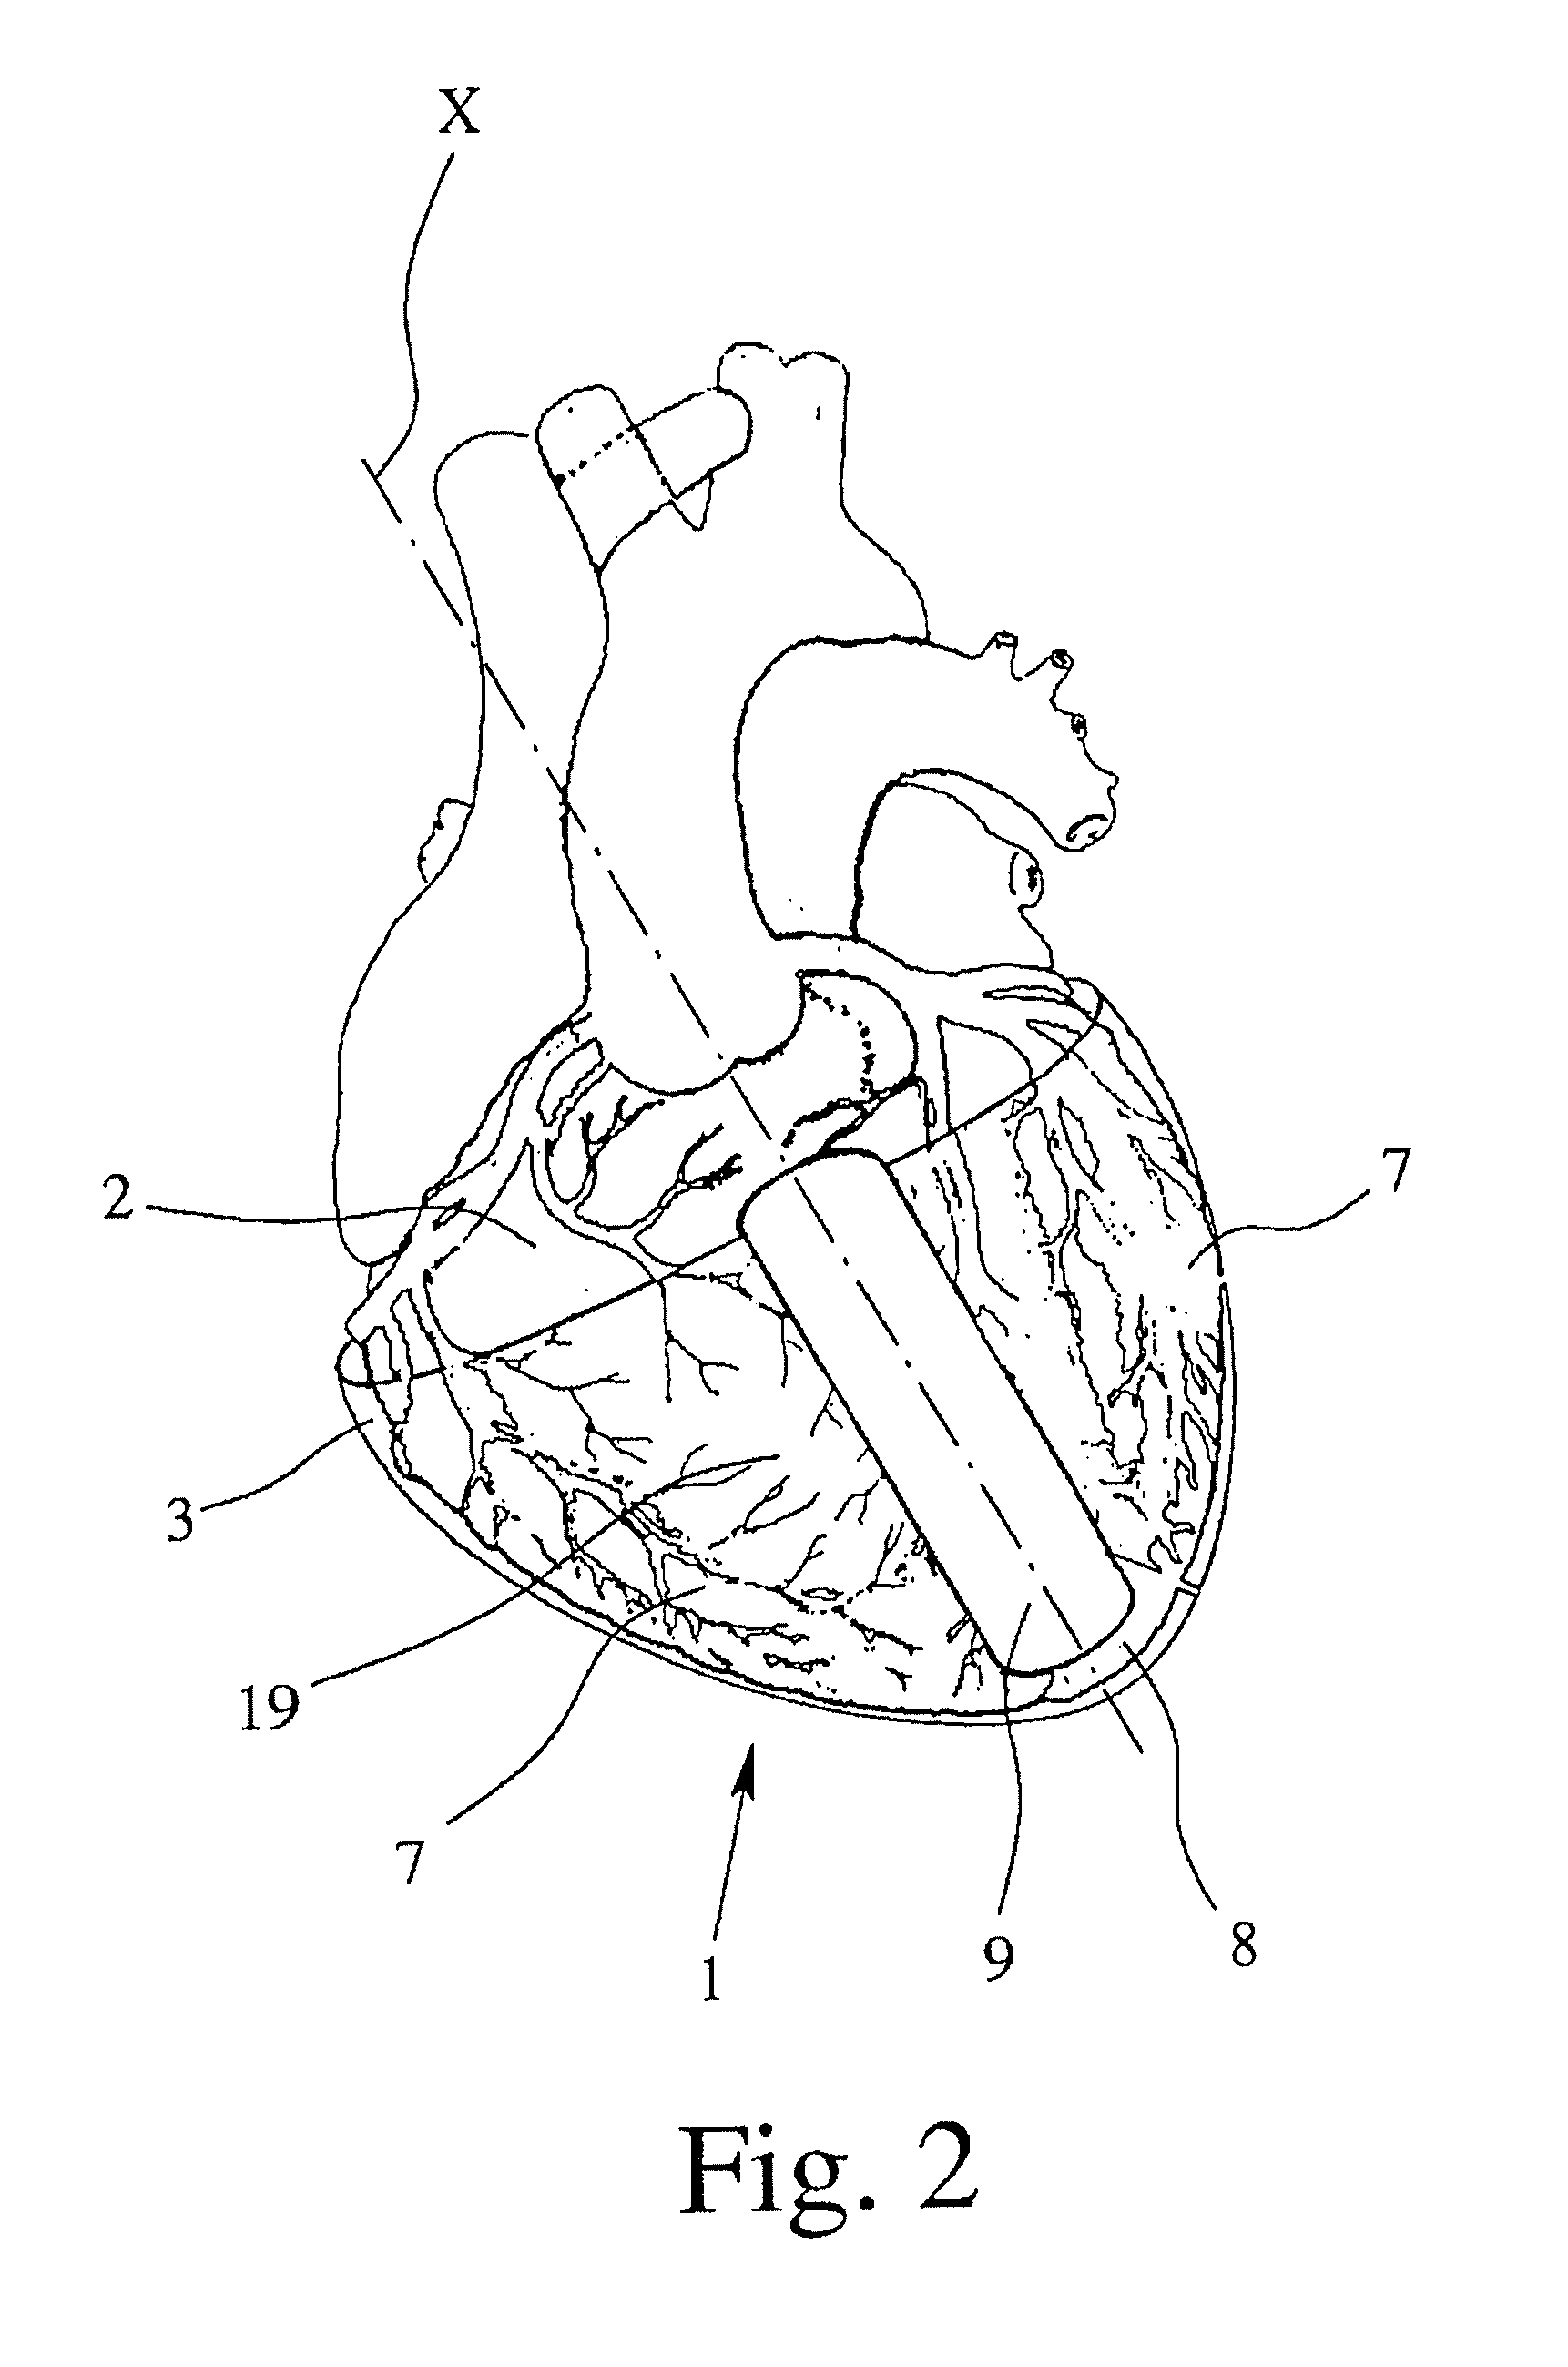 Device and system for assisting and/or taking over the pumping function of the heart